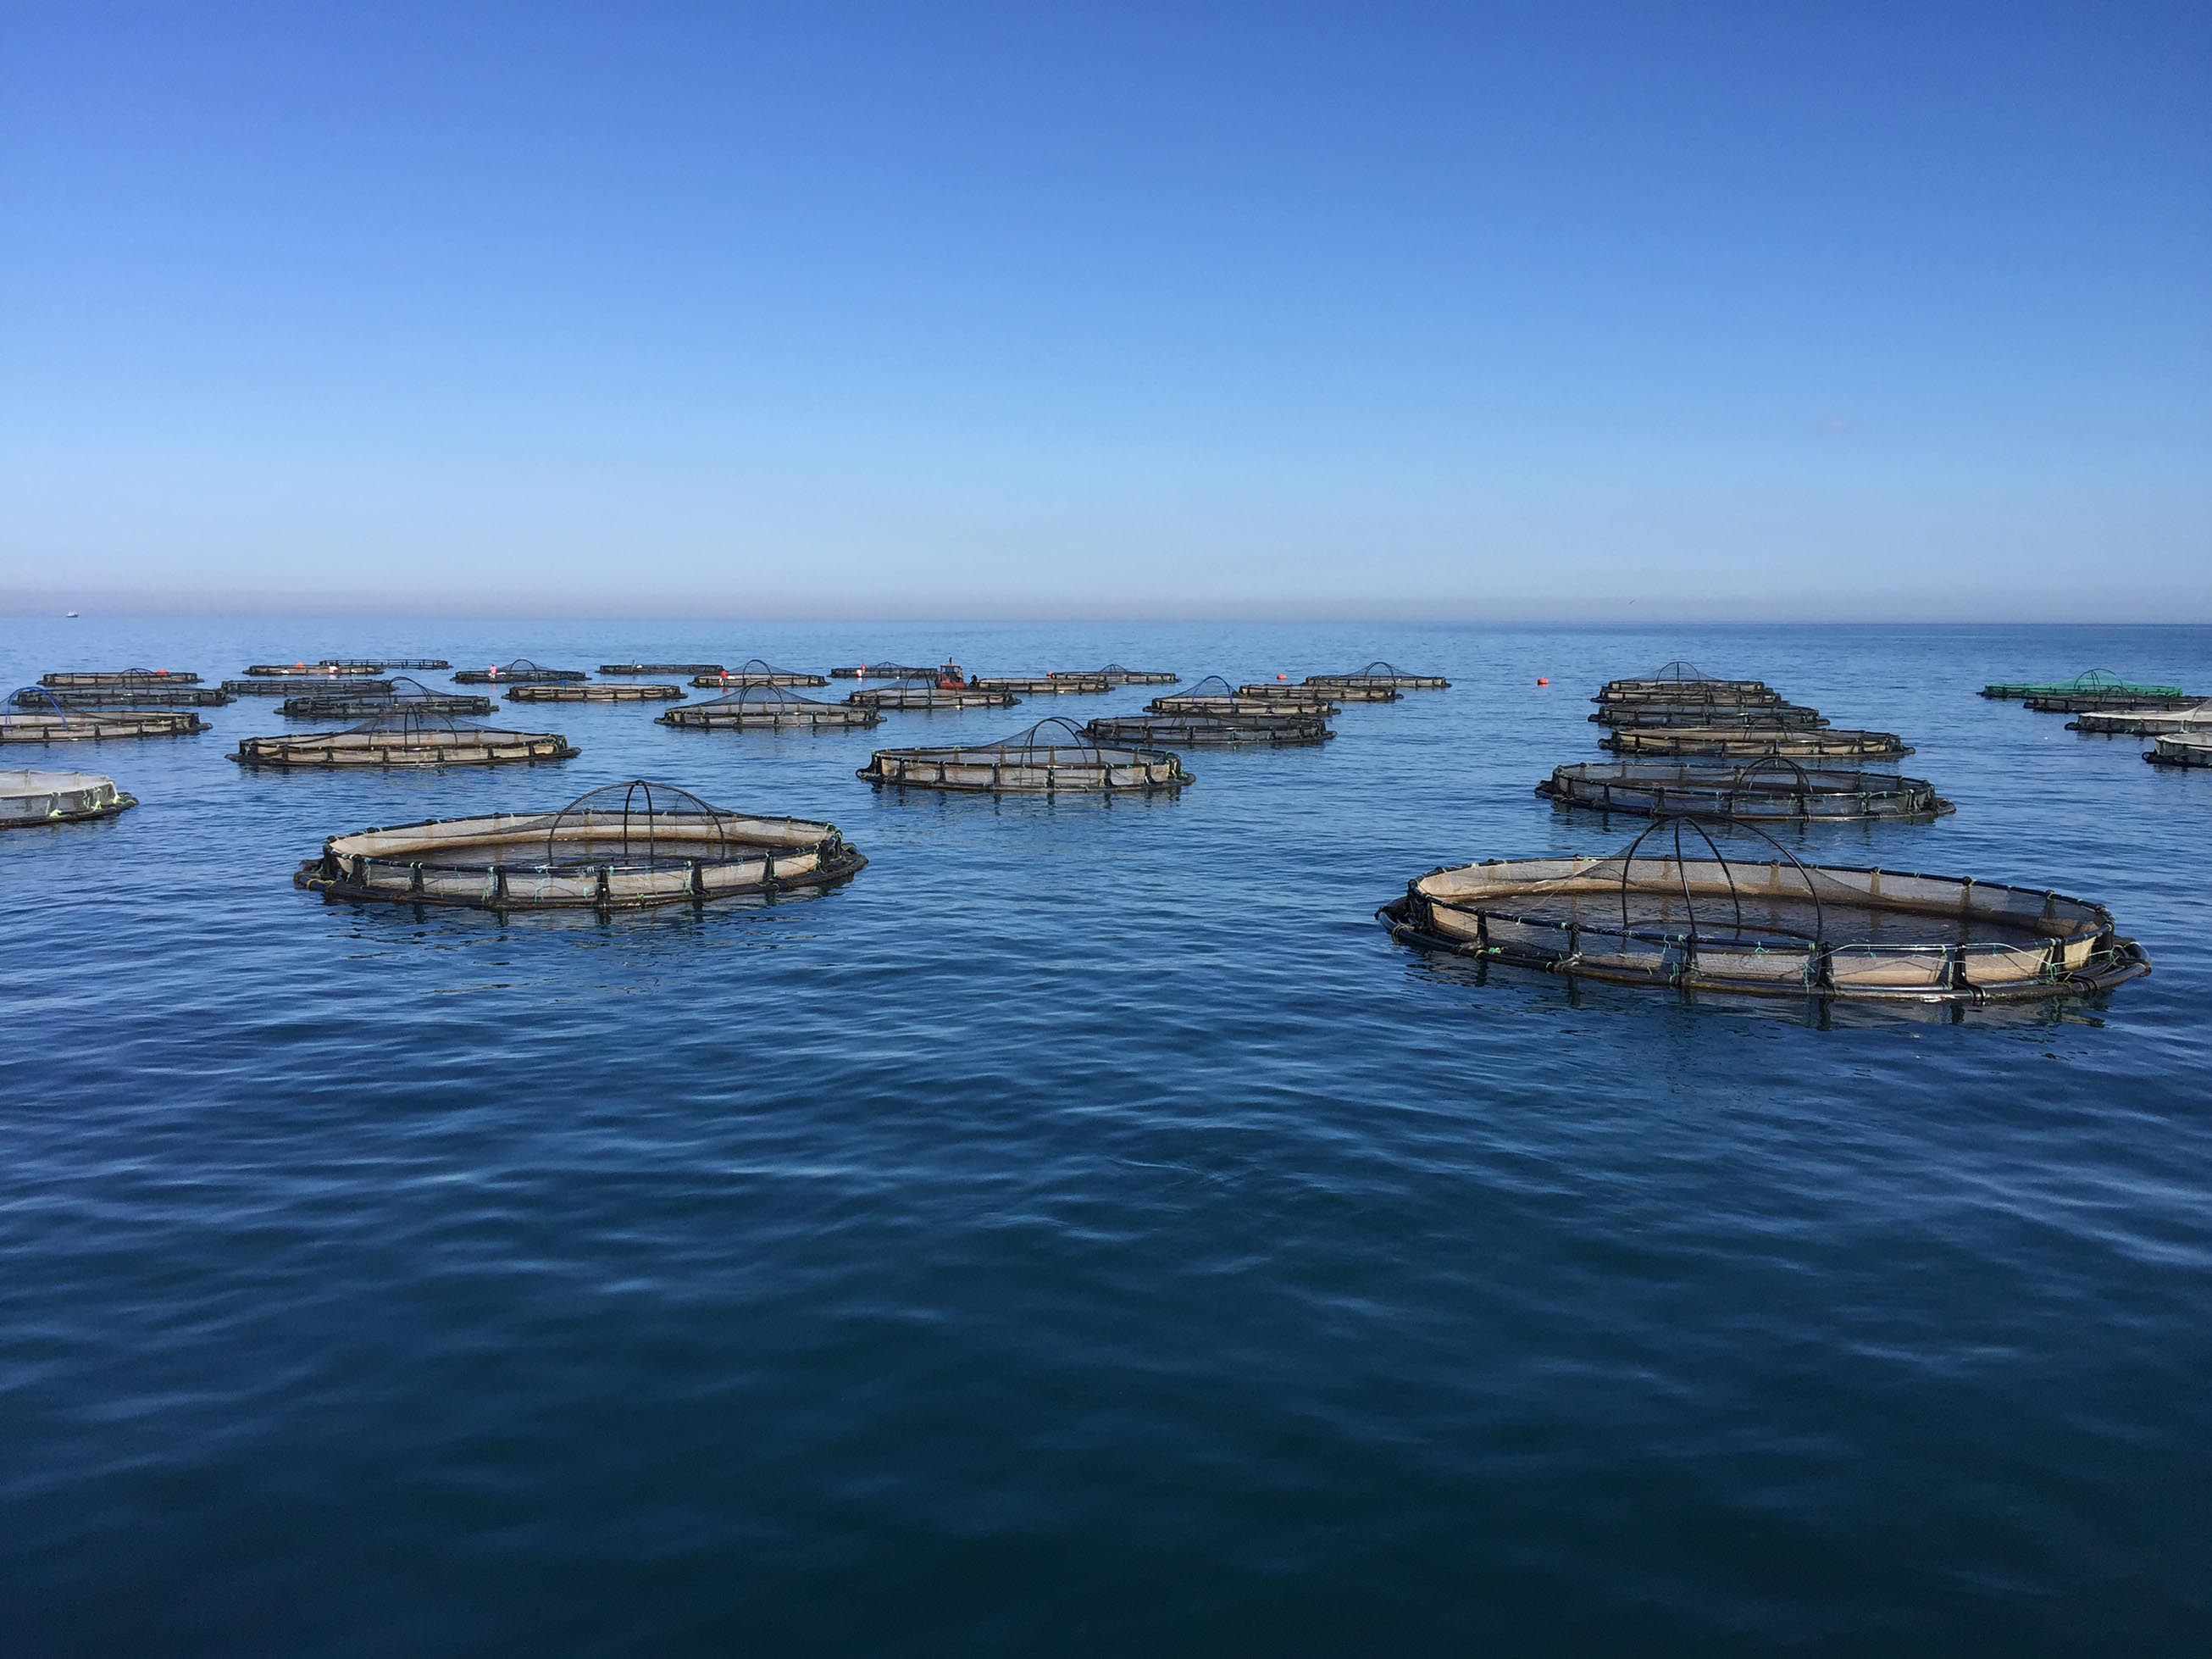 Aquaculture and fish farms must adapt to the changing sea conditions of climate change.